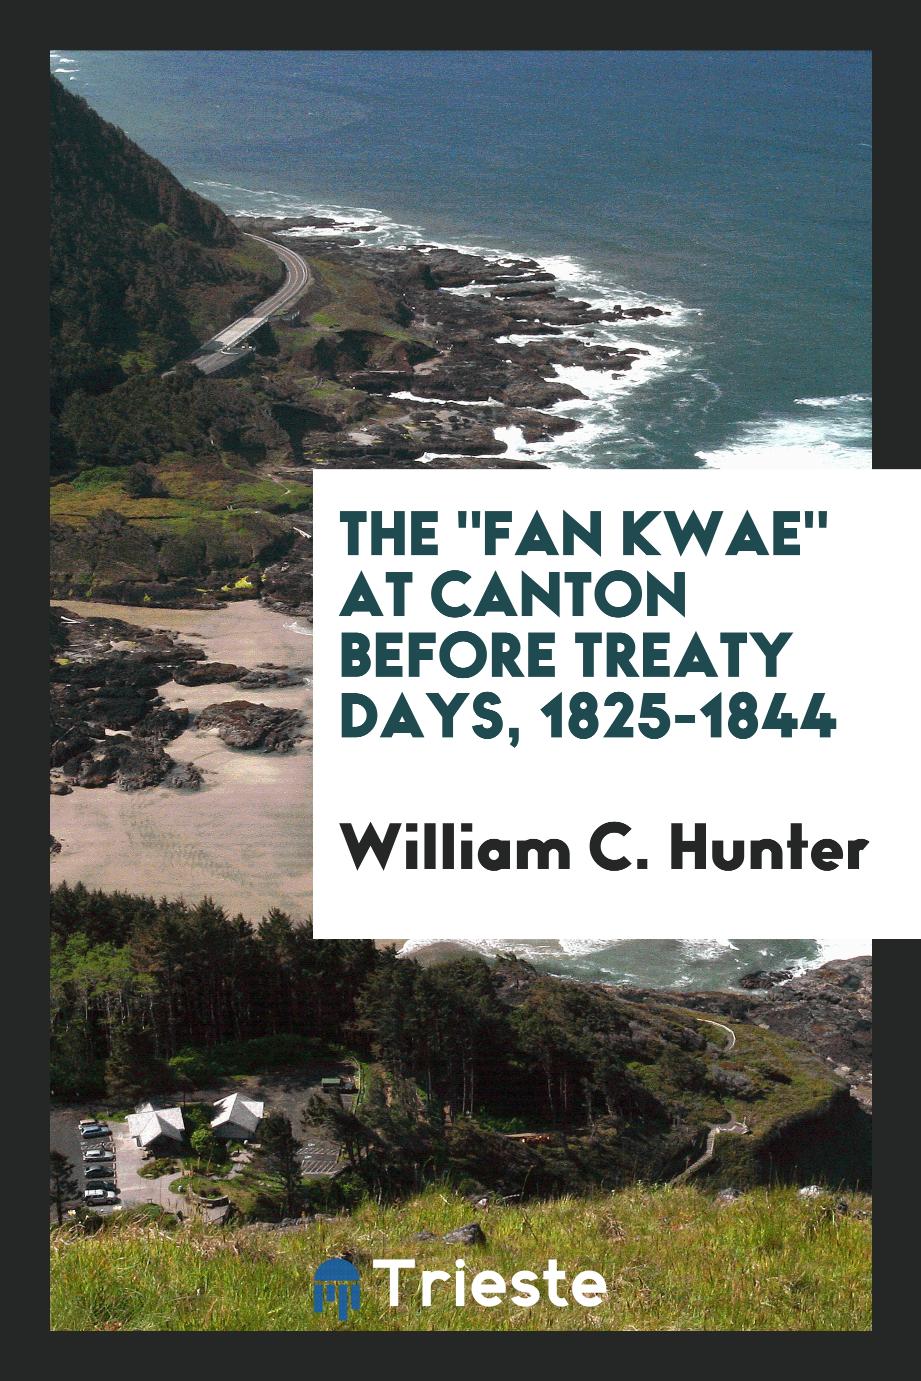 The "Fan Kwae" at Canton before Treaty Days, 1825-1844